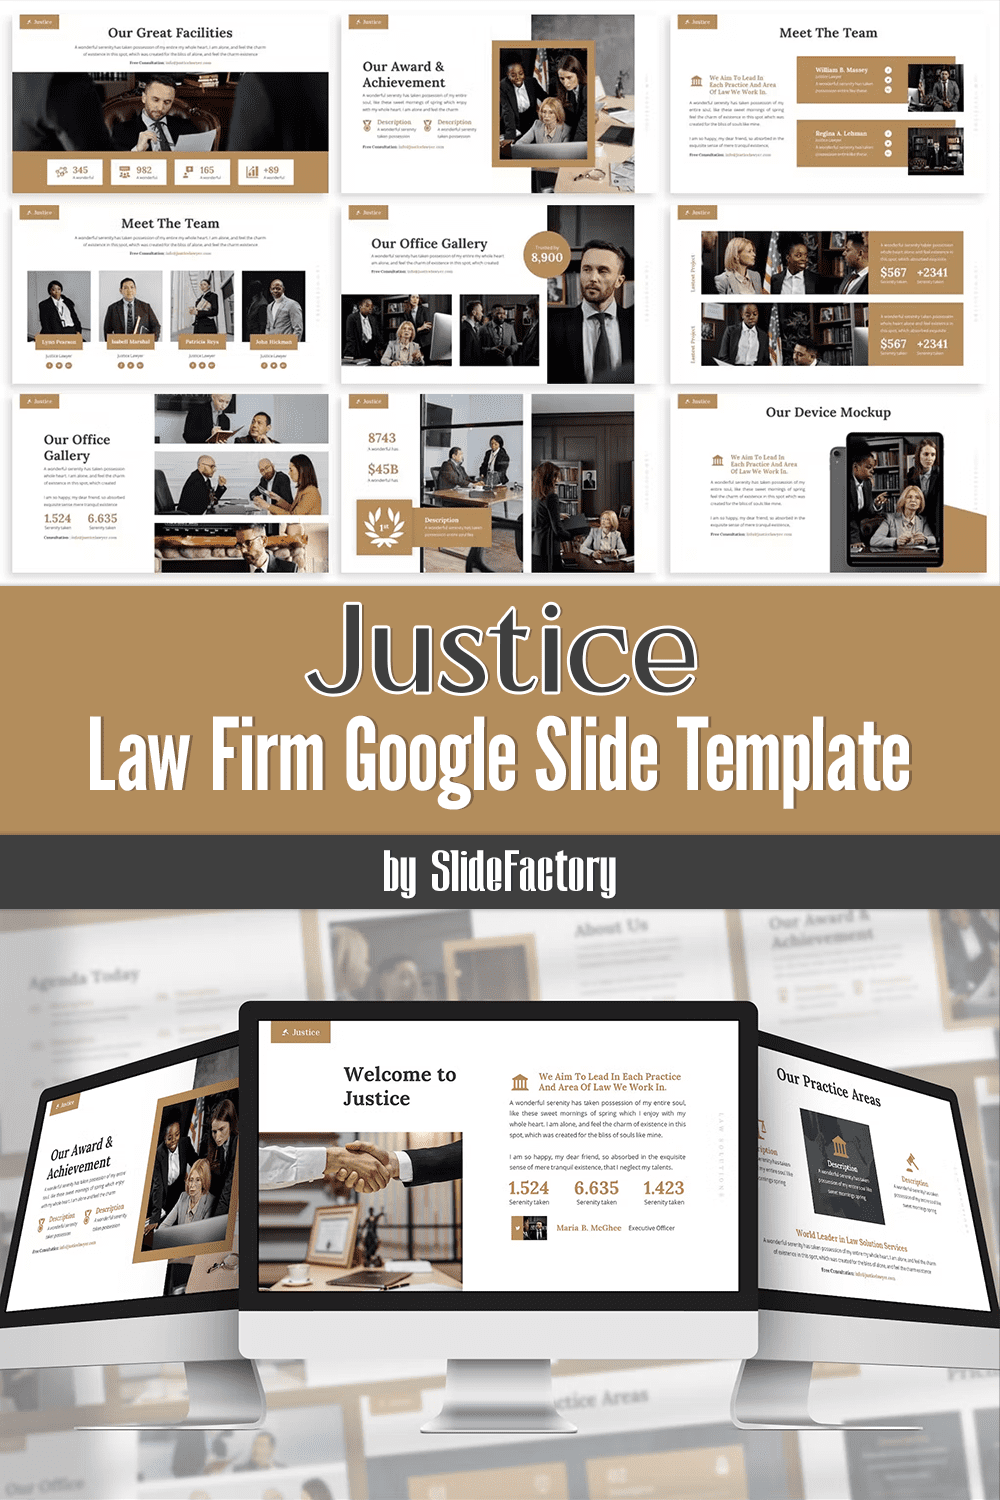 Justice law firm google slide template of pinterest.